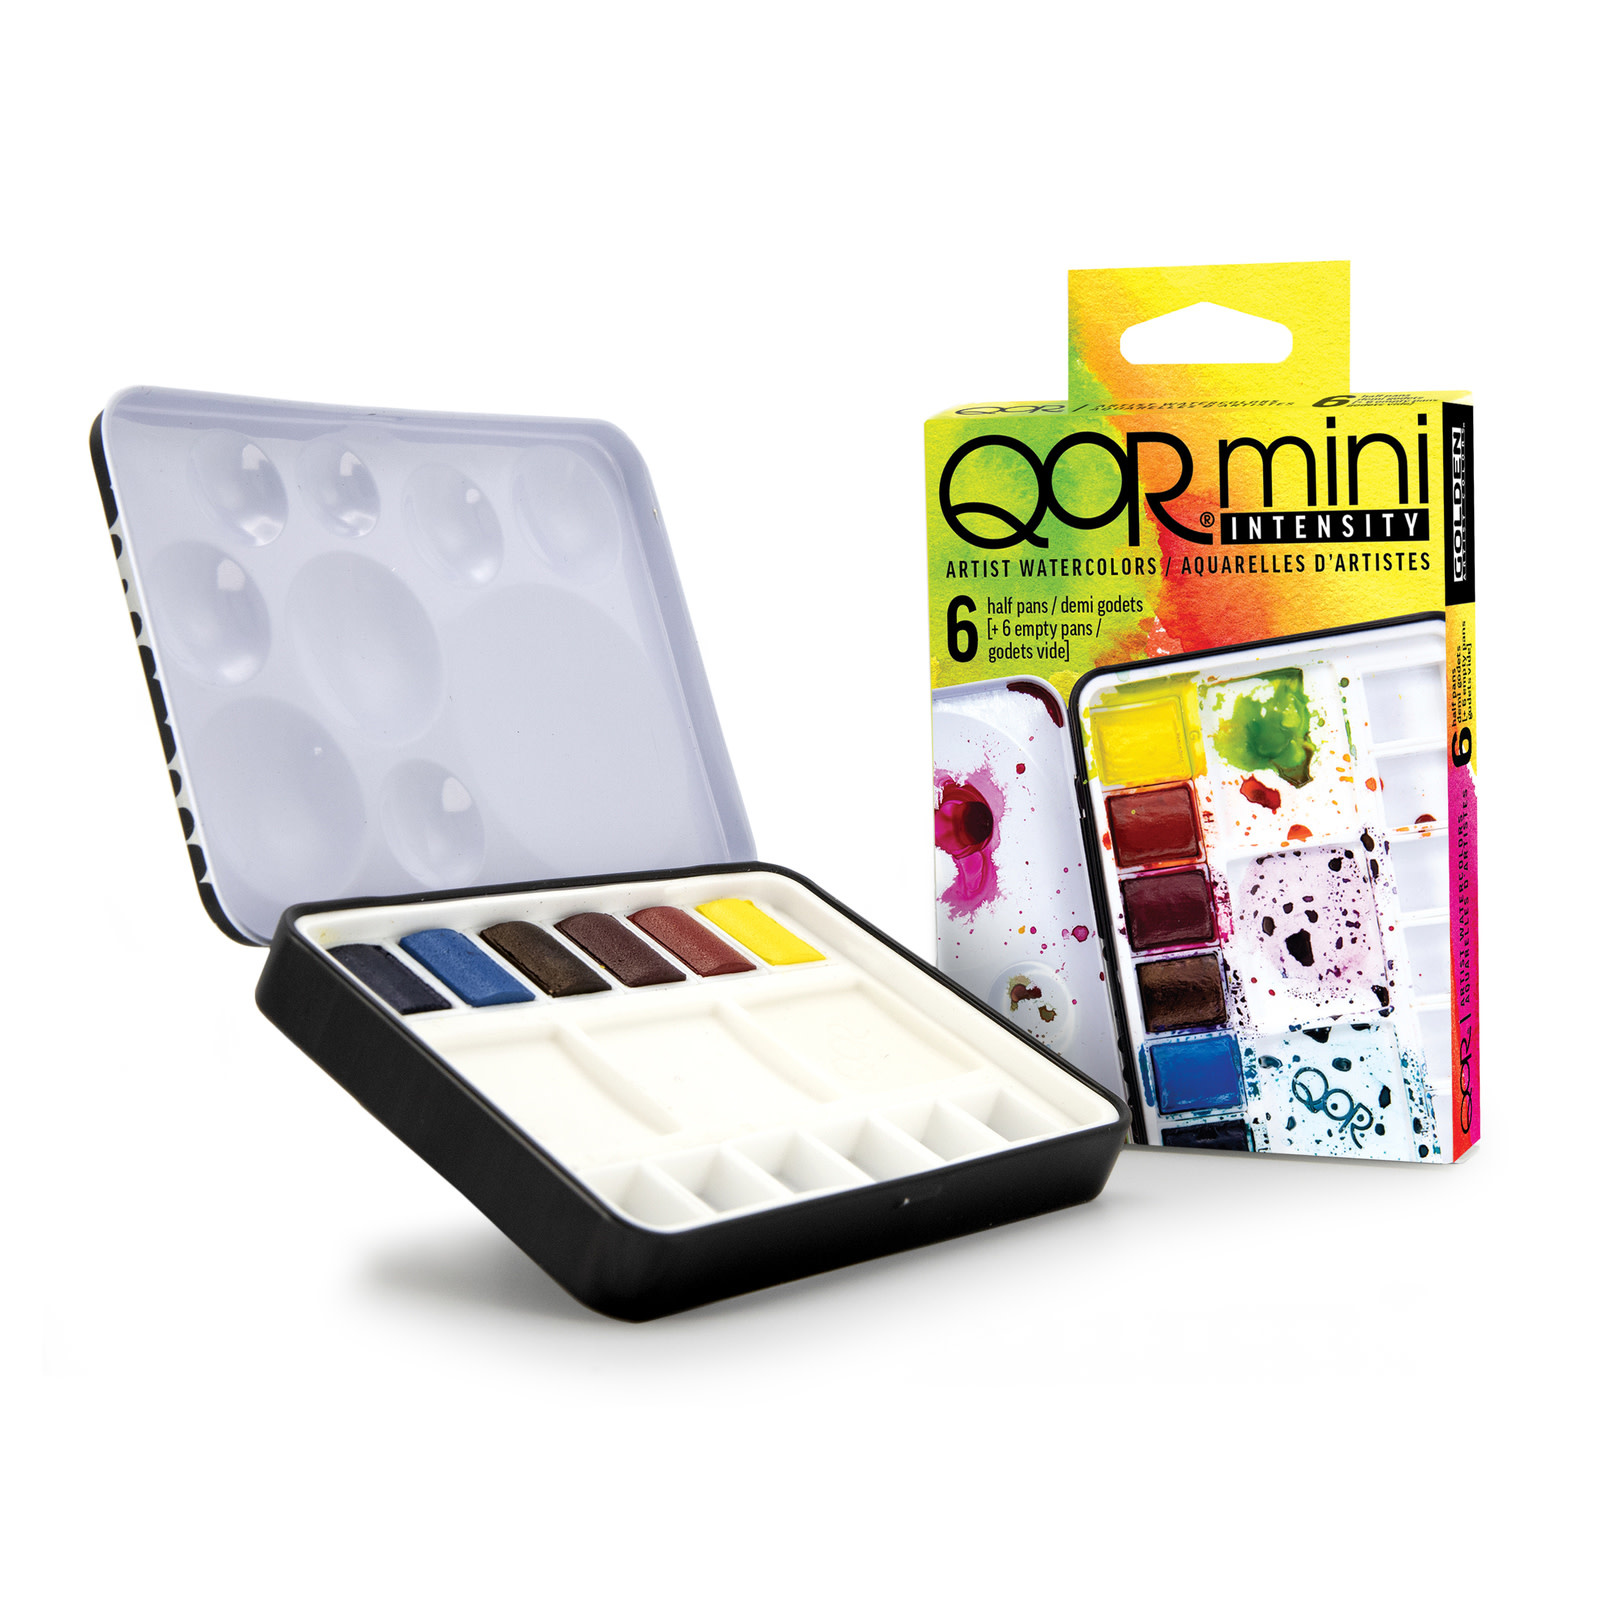 QoR Watercolor, Made by Golden Artist Paints, Introductory Set of 12 Colors